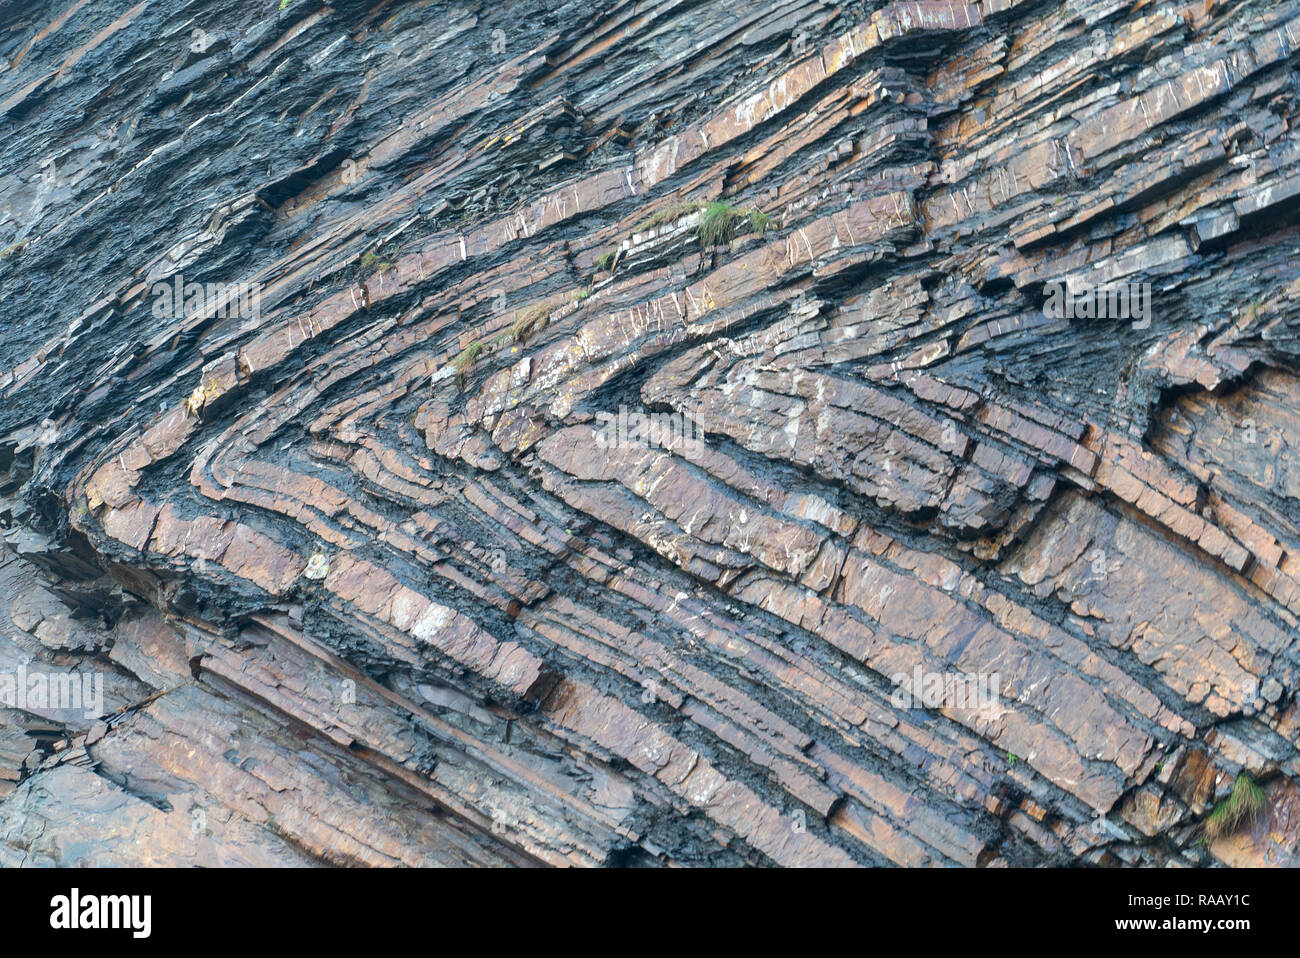 Spectacularly folded sequence of alternating grey shales and sandstones detail [4 of 5], North Cornwall UK Stock Photo